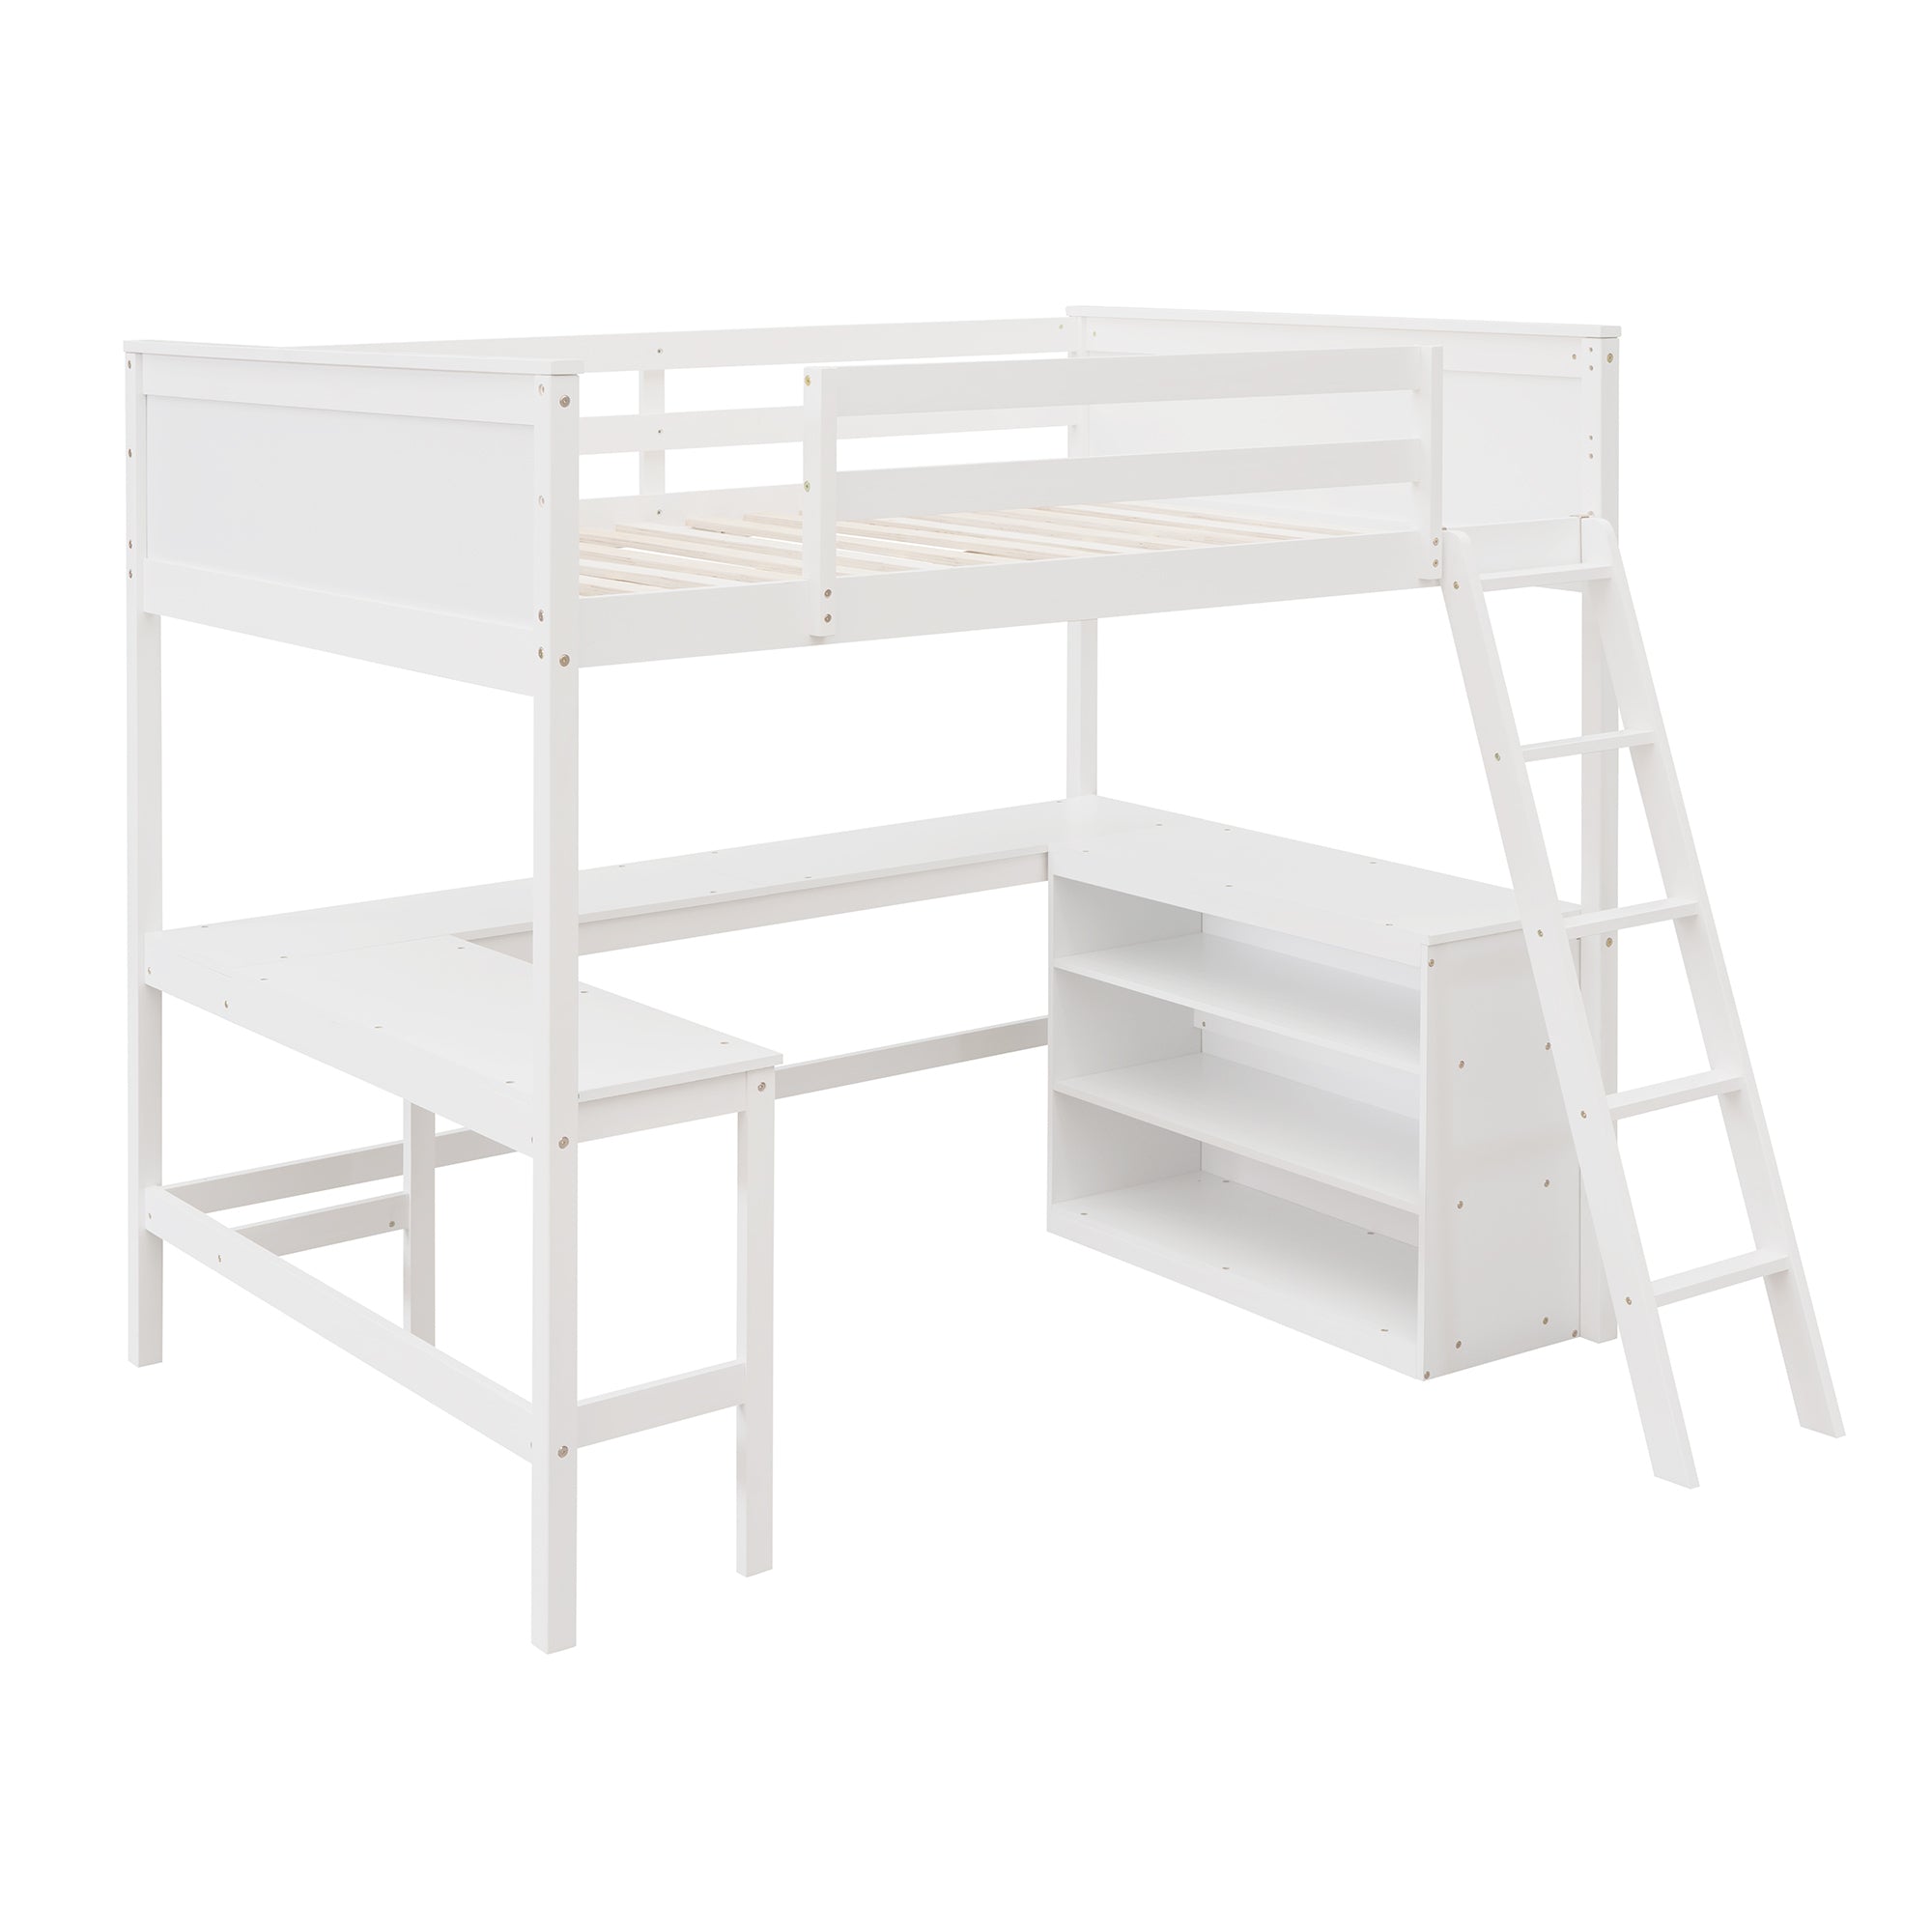 Full size Loft Bed with Shelves and Desk (White)